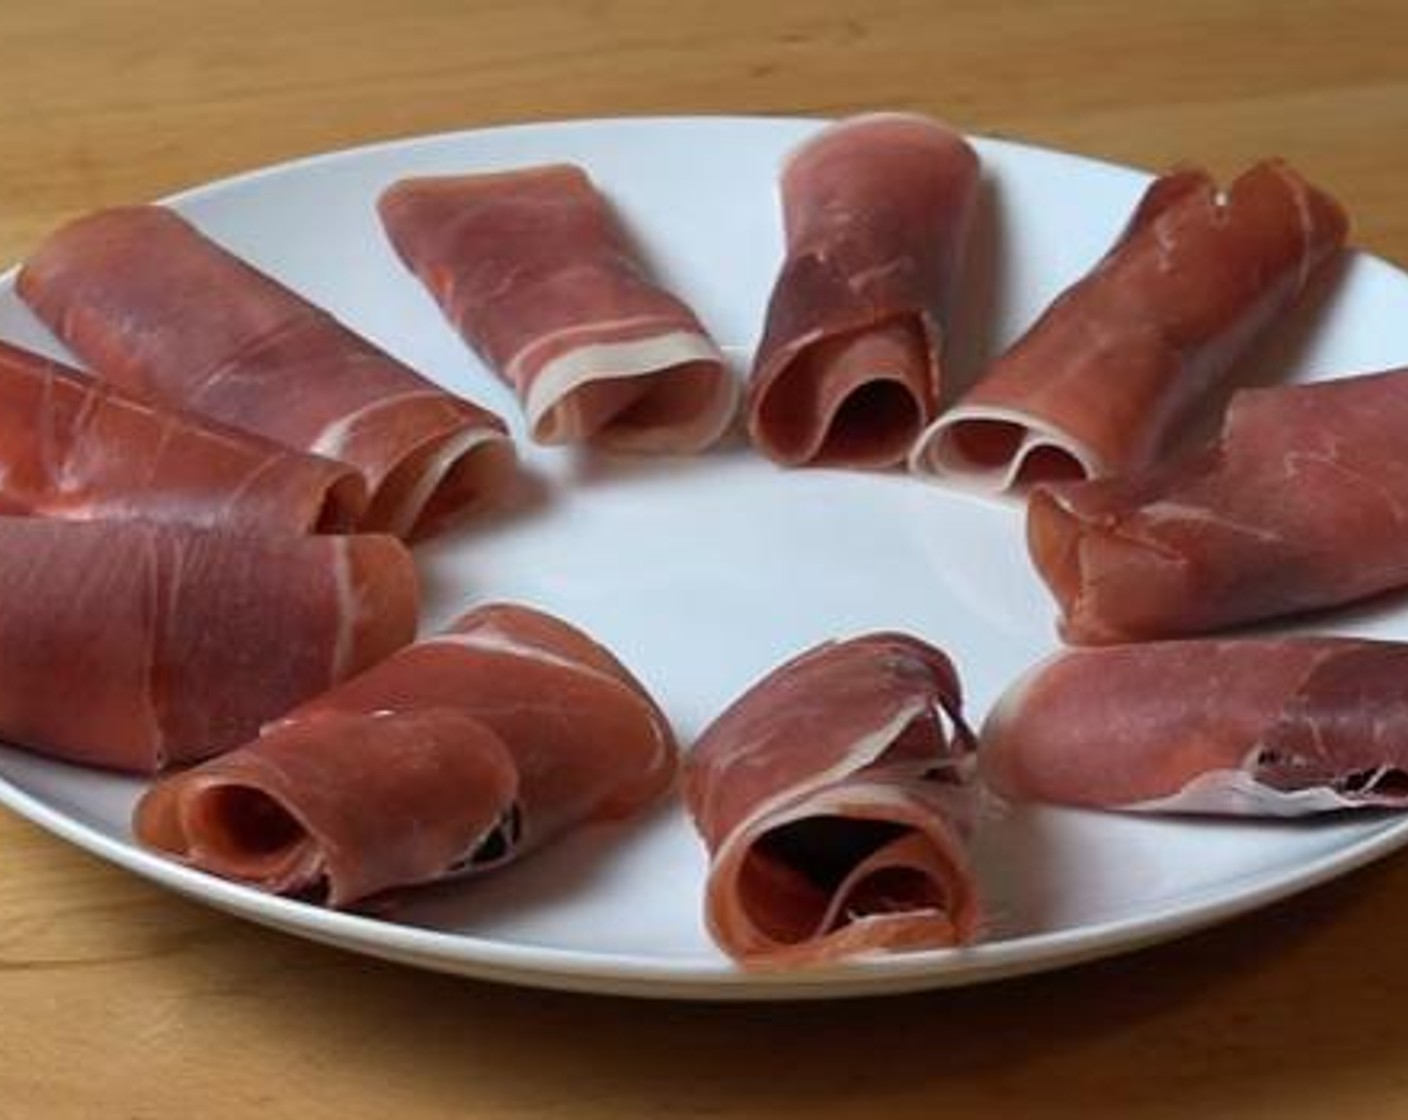 step 2 Roll each parma ham. Place on a plate and serve. Enjoy!